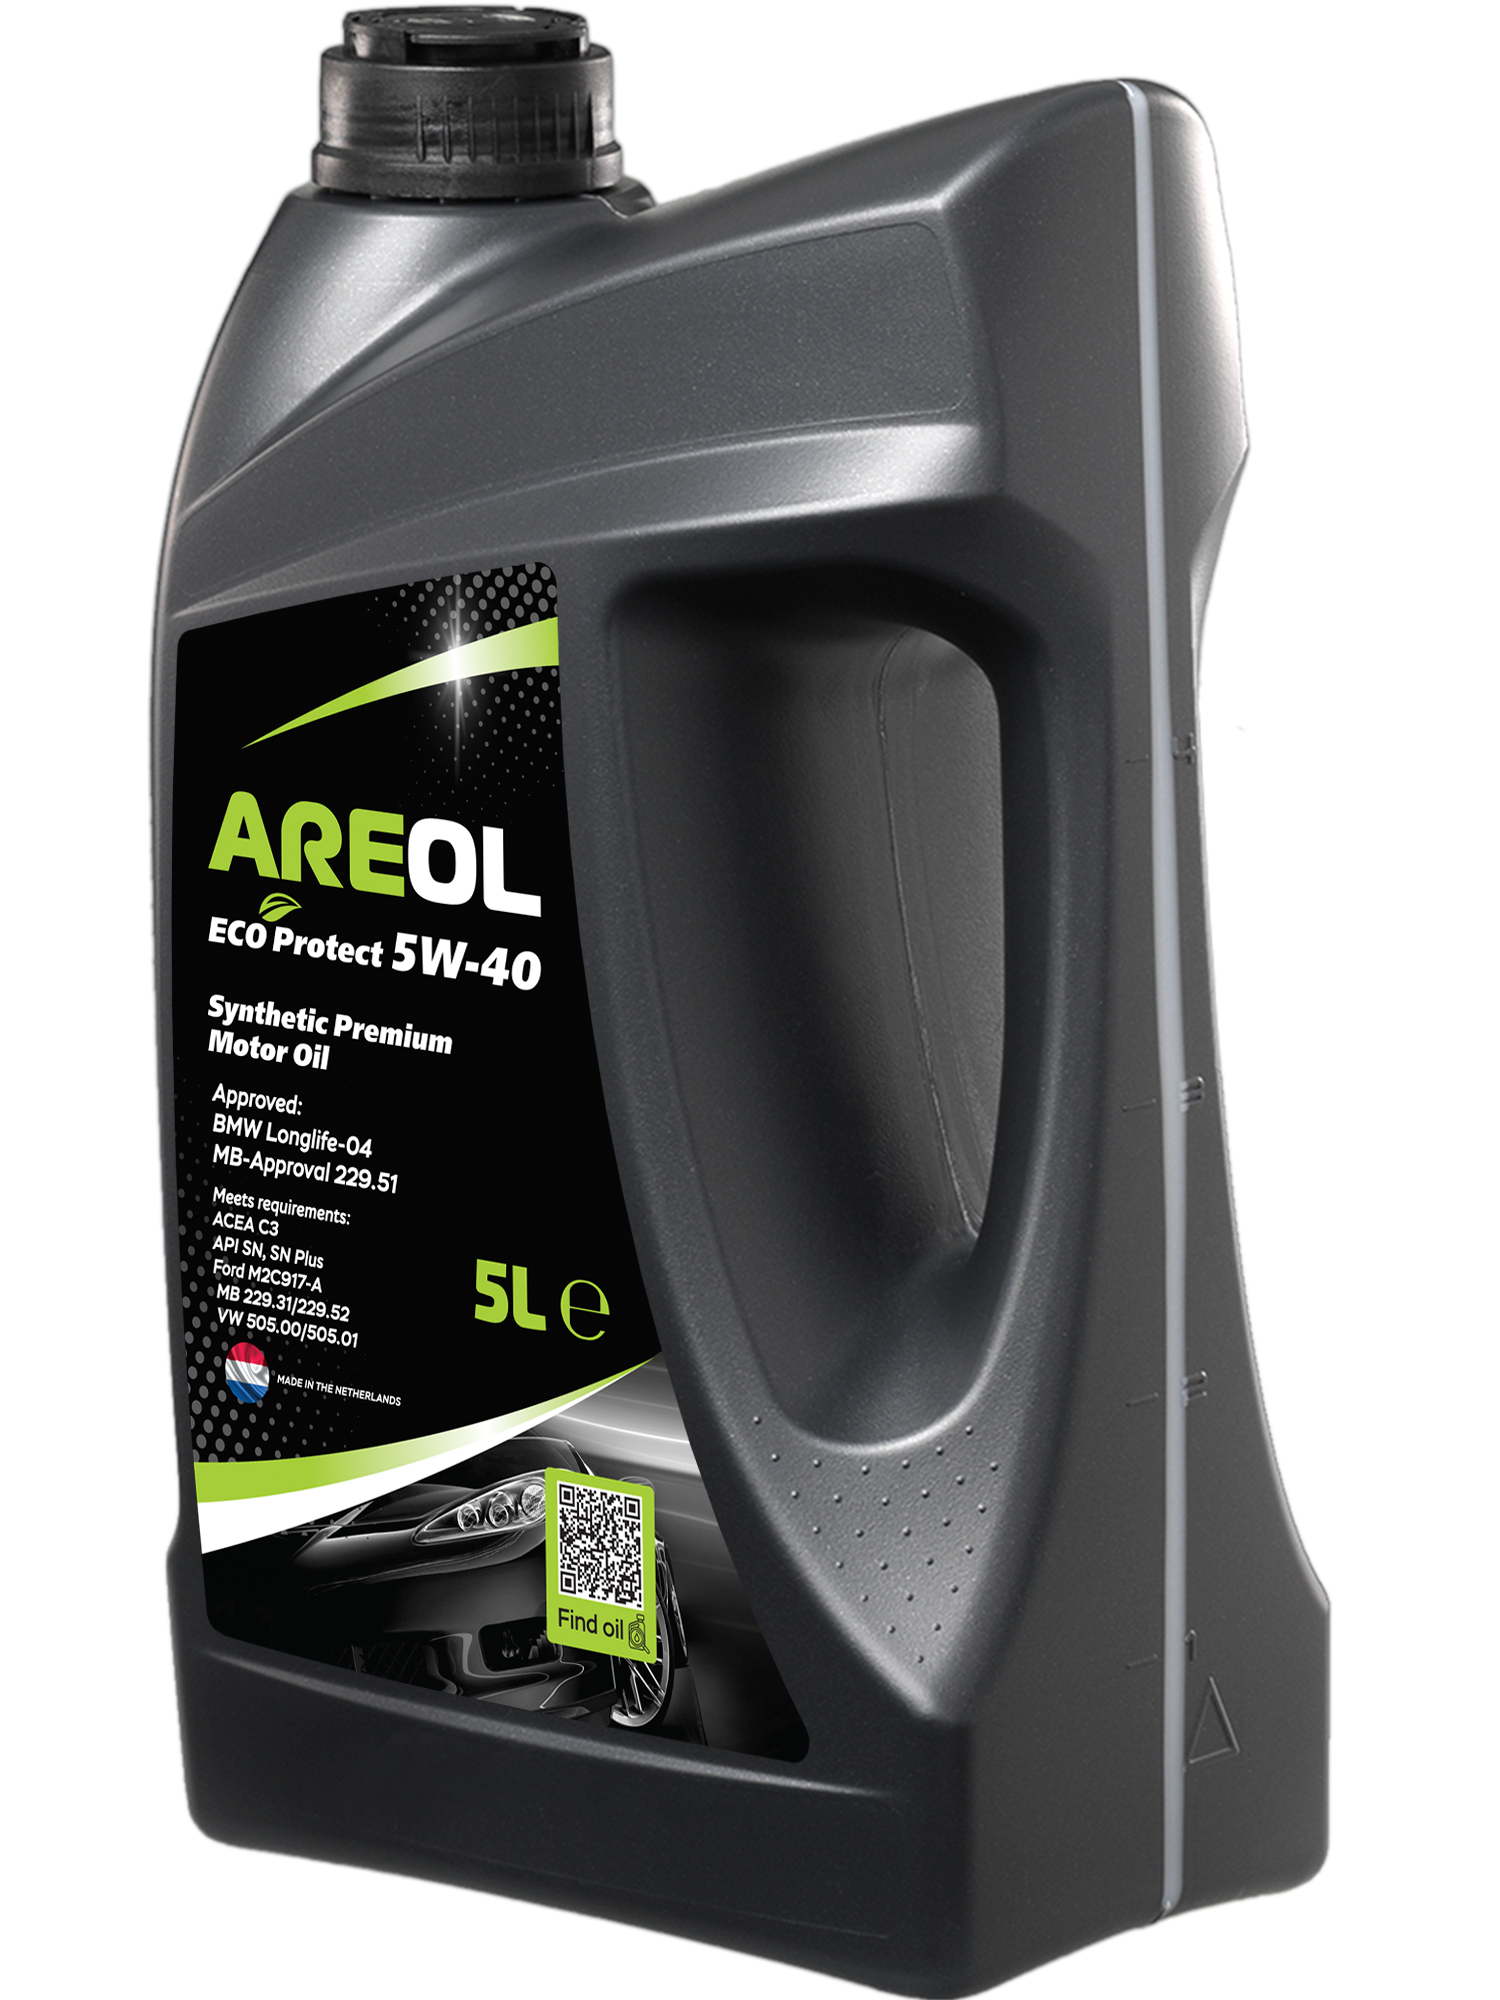 Motor Oil AREOL ECO Protect 5W-40 5L